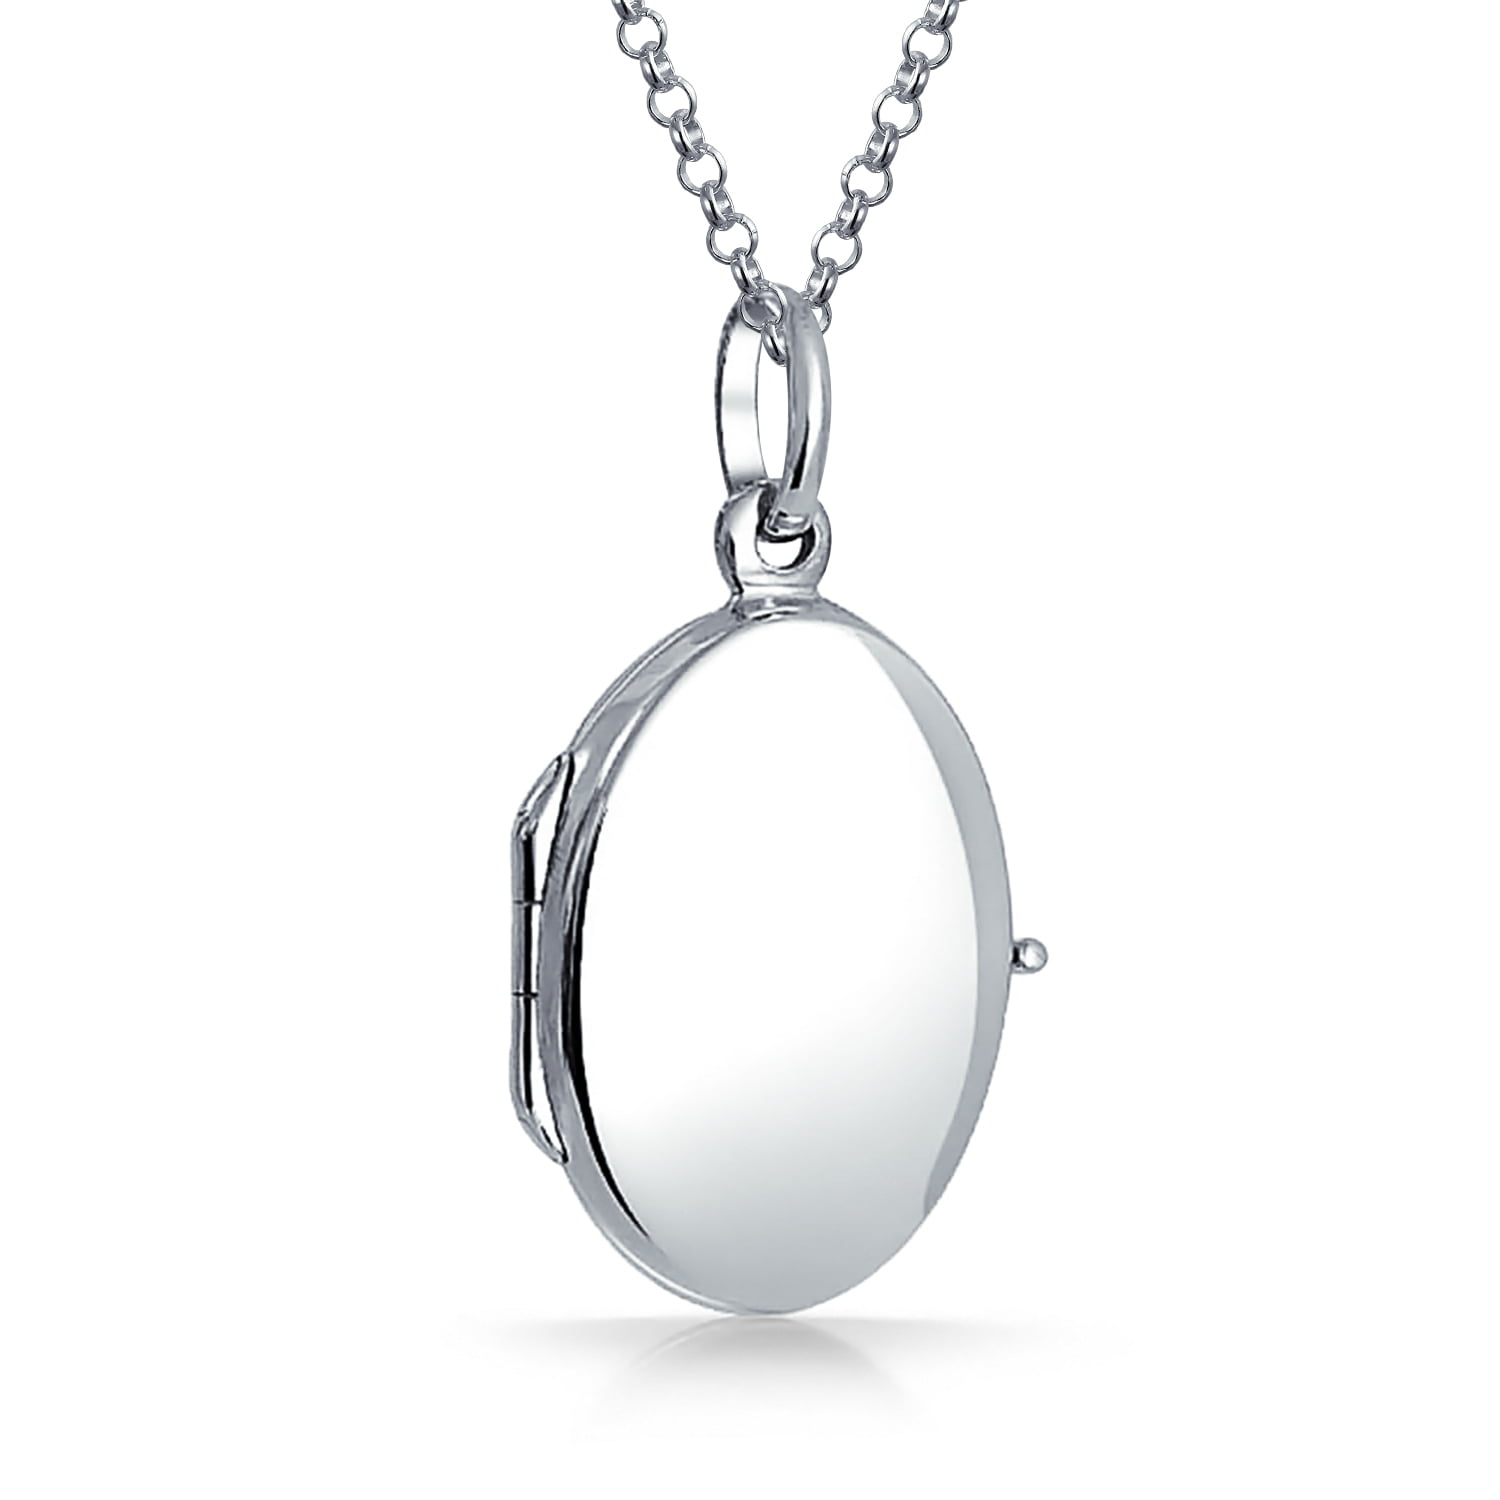 Bling Jewelry - Simple Plain Flat Oval Photo Lockets For Women For Teen ...